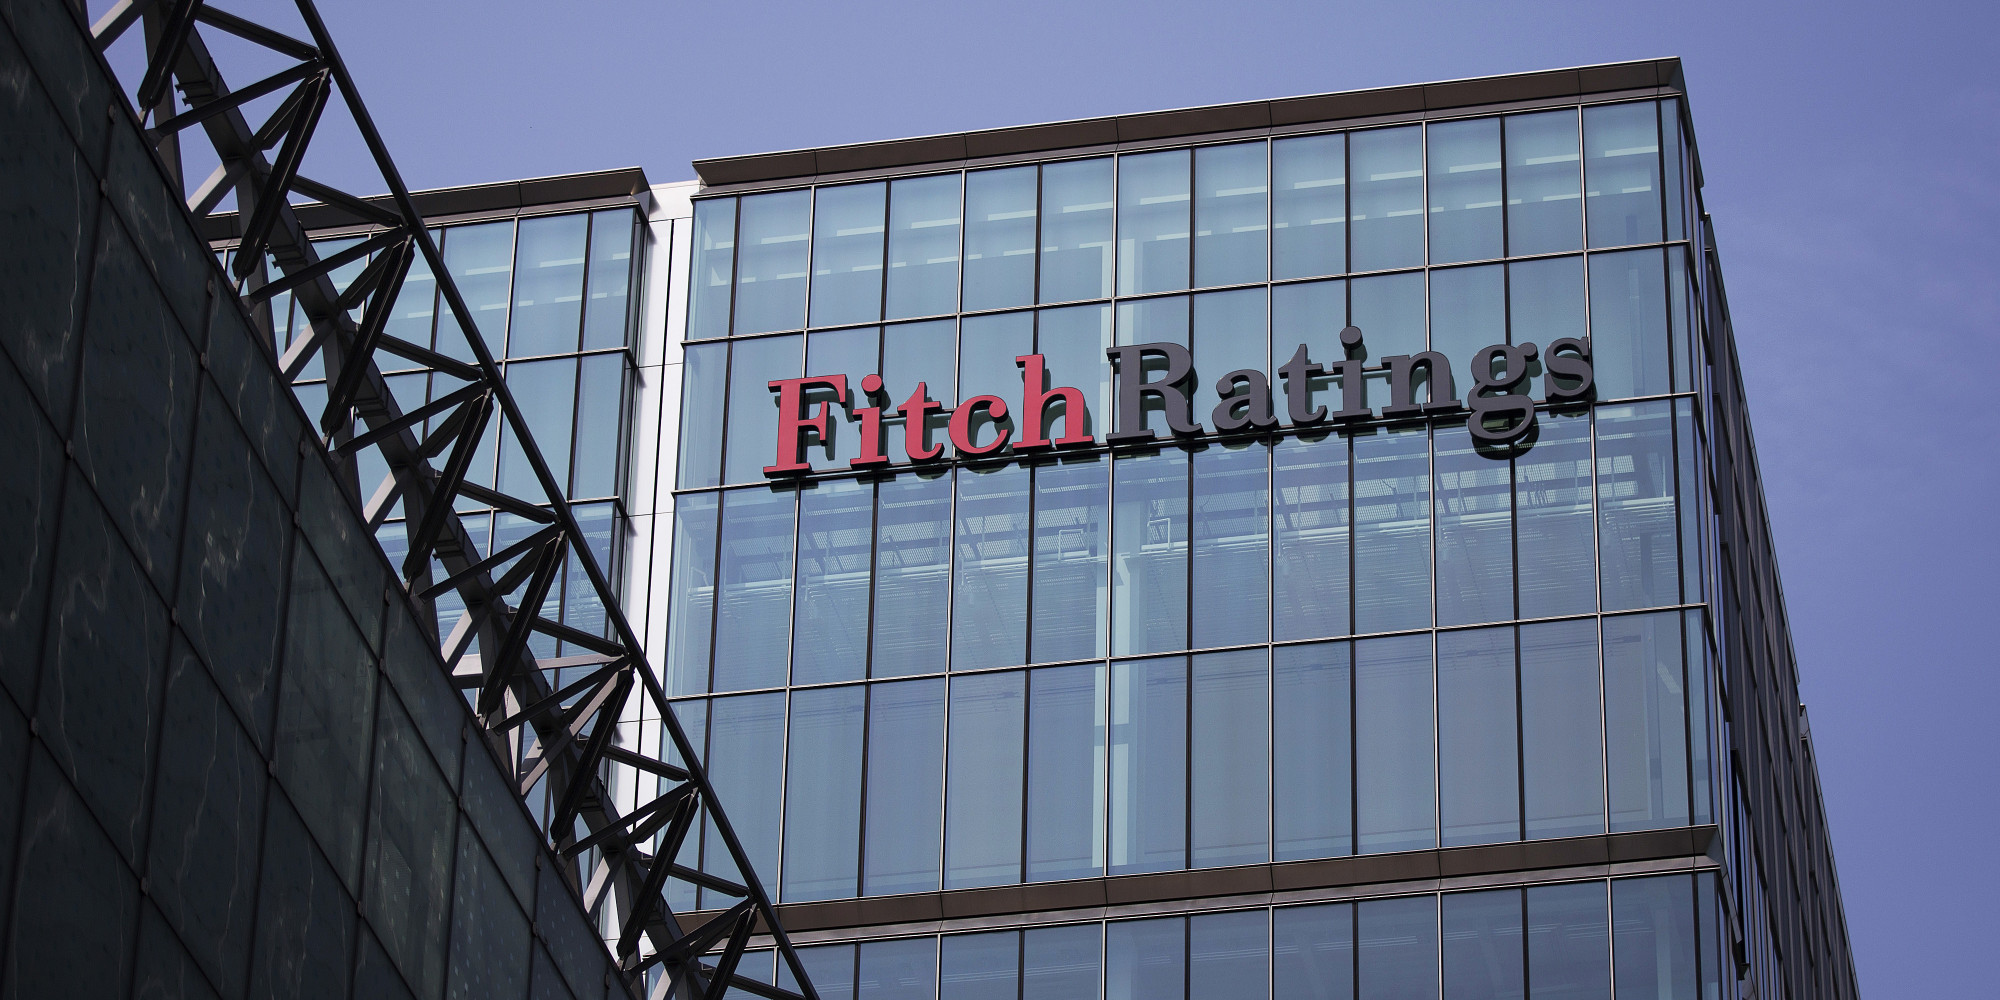 The headquarters of Fitch Ratings Ltd., stand in the Canary Wharf business and shopping district, in London, U.K.